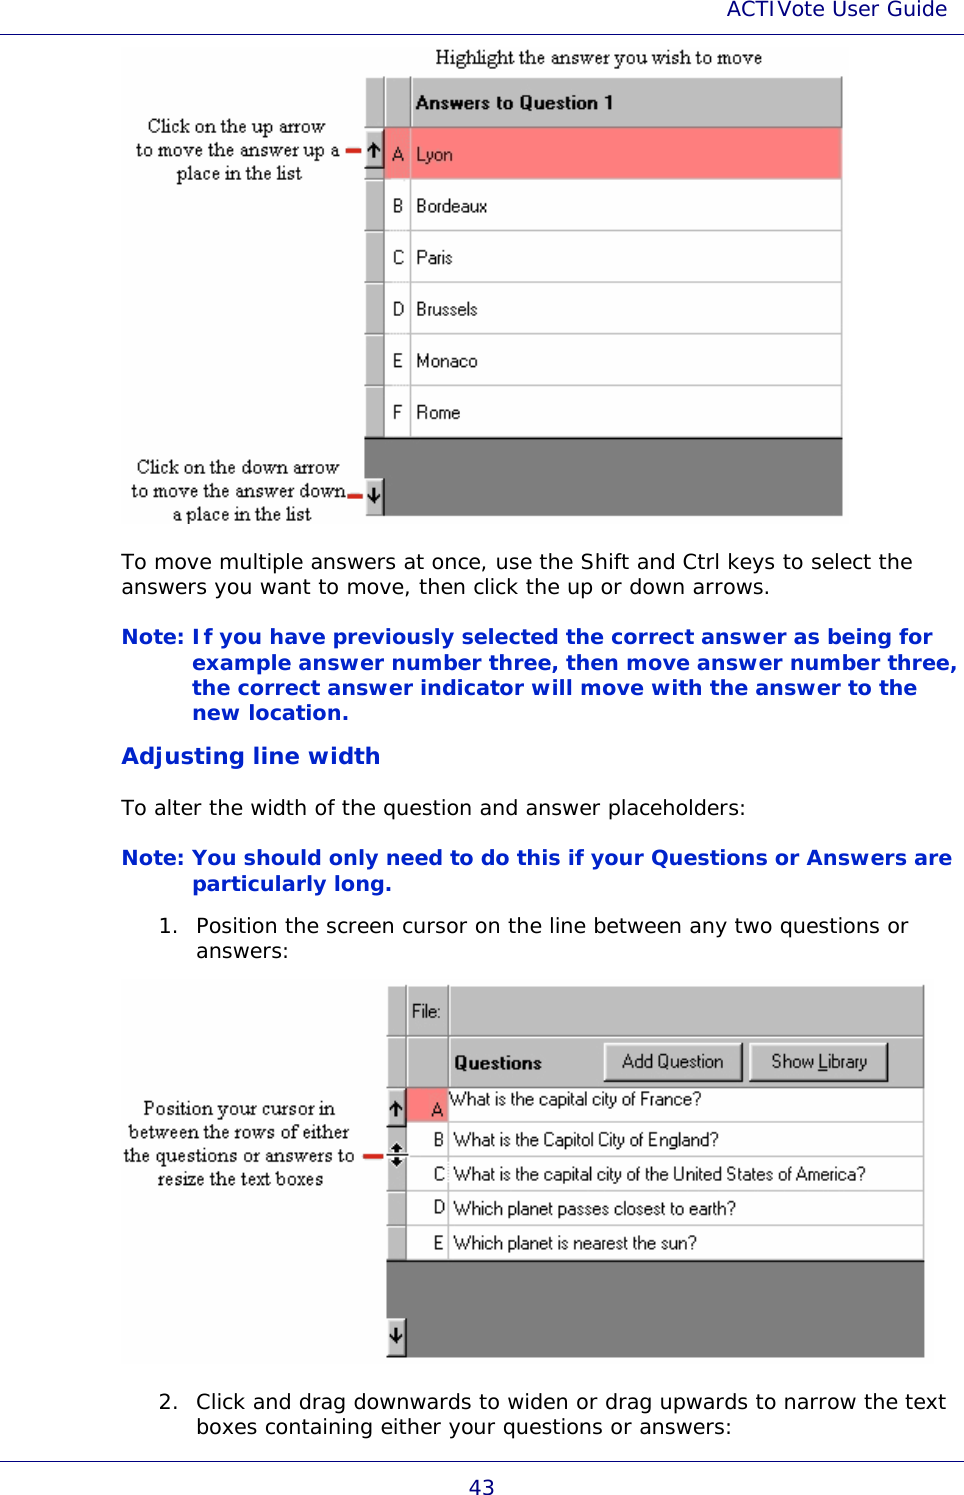 ACTIVote User Guide 43  To move multiple answers at once, use the Shift and Ctrl keys to select the answers you want to move, then click the up or down arrows. Note: If you have previously selected the correct answer as being for example answer number three, then move answer number three, the correct answer indicator will move with the answer to the new location.  Adjusting line width To alter the width of the question and answer placeholders: Note: You should only need to do this if your Questions or Answers are particularly long.  1. Position the screen cursor on the line between any two questions or answers:  2. Click and drag downwards to widen or drag upwards to narrow the text boxes containing either your questions or answers: 